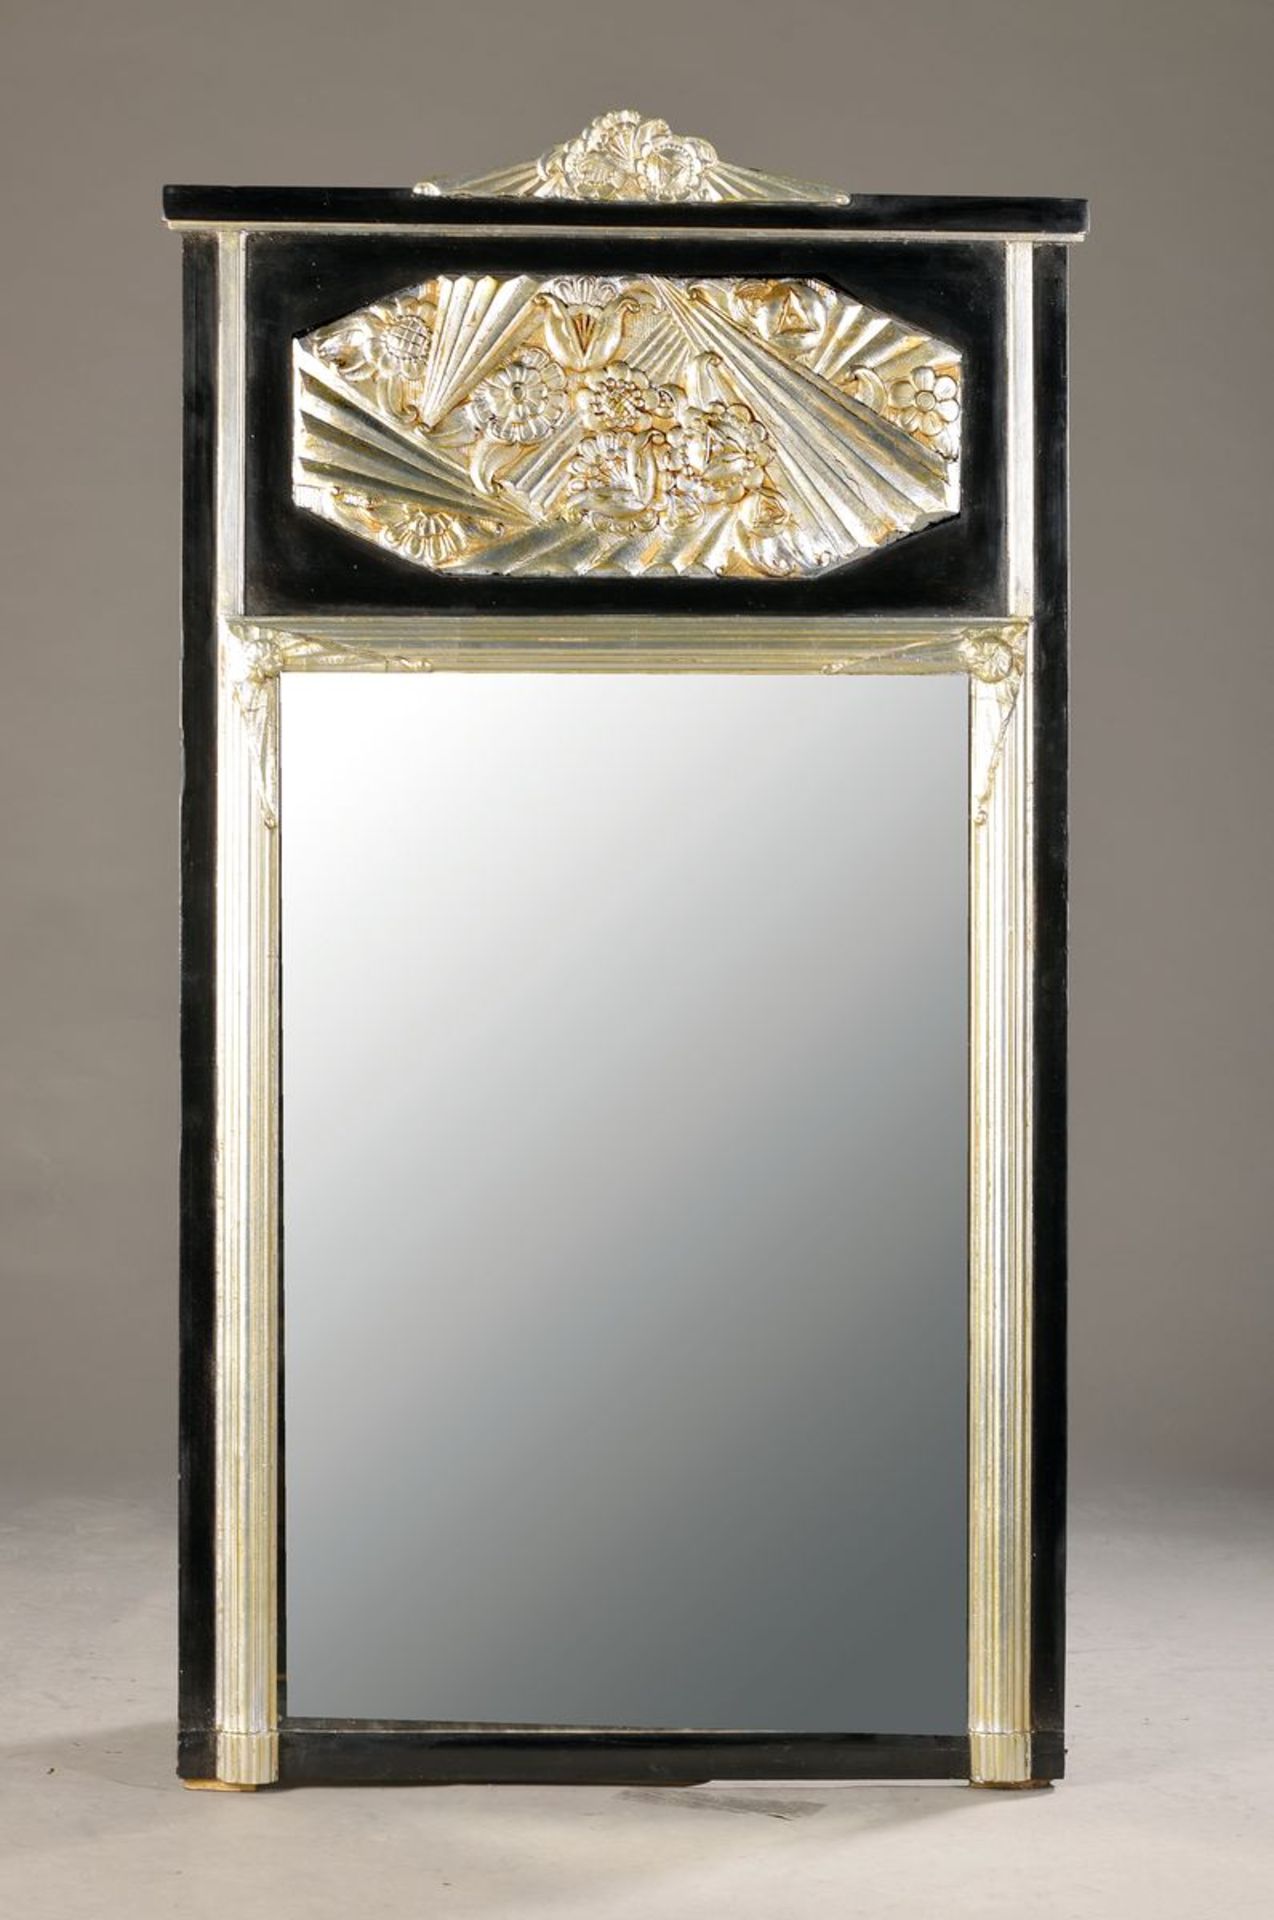 Mirror, after the model of 1925/30, wood frame lined, with abstract flower leaves and rays, black